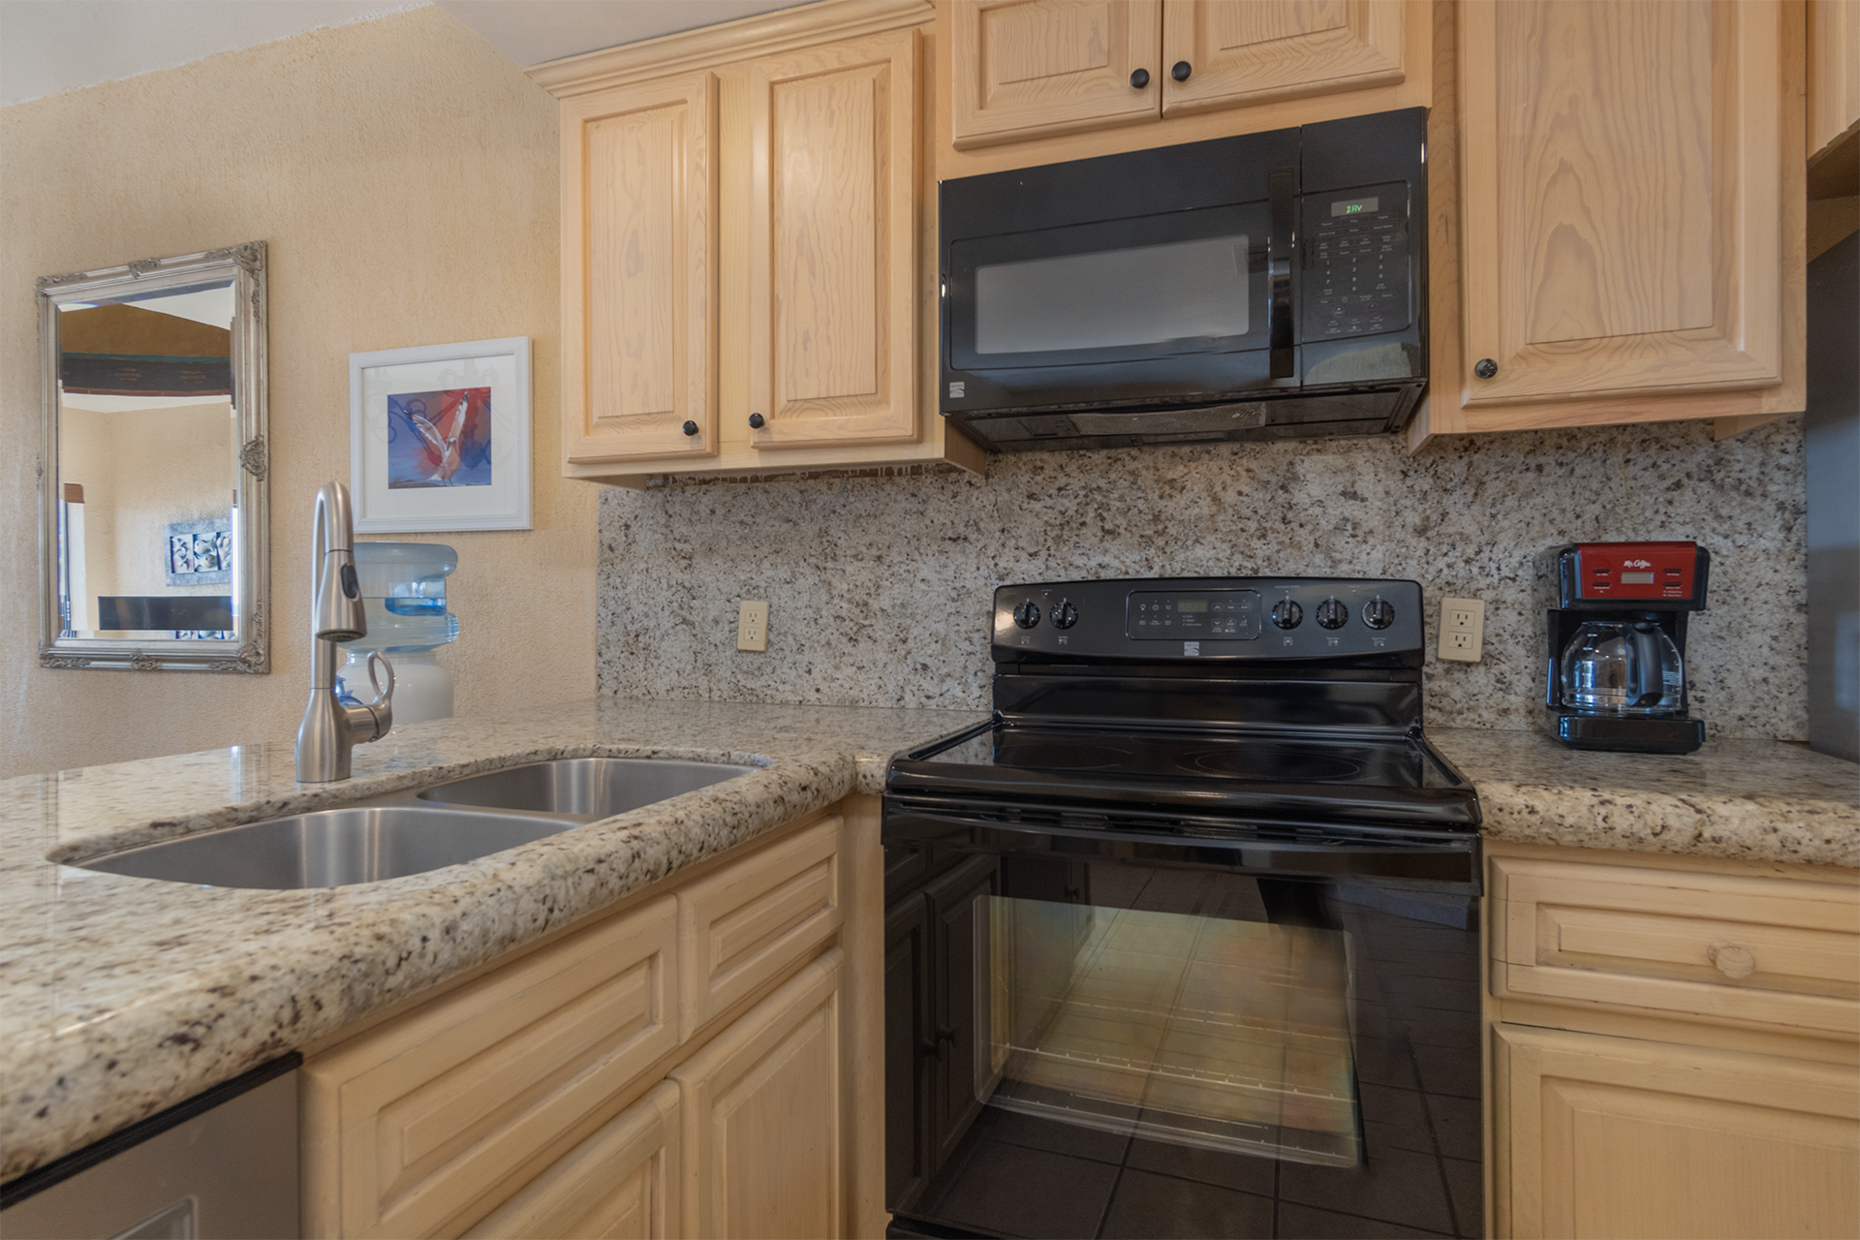 Appliances in the kitchen are perfect for your stay.